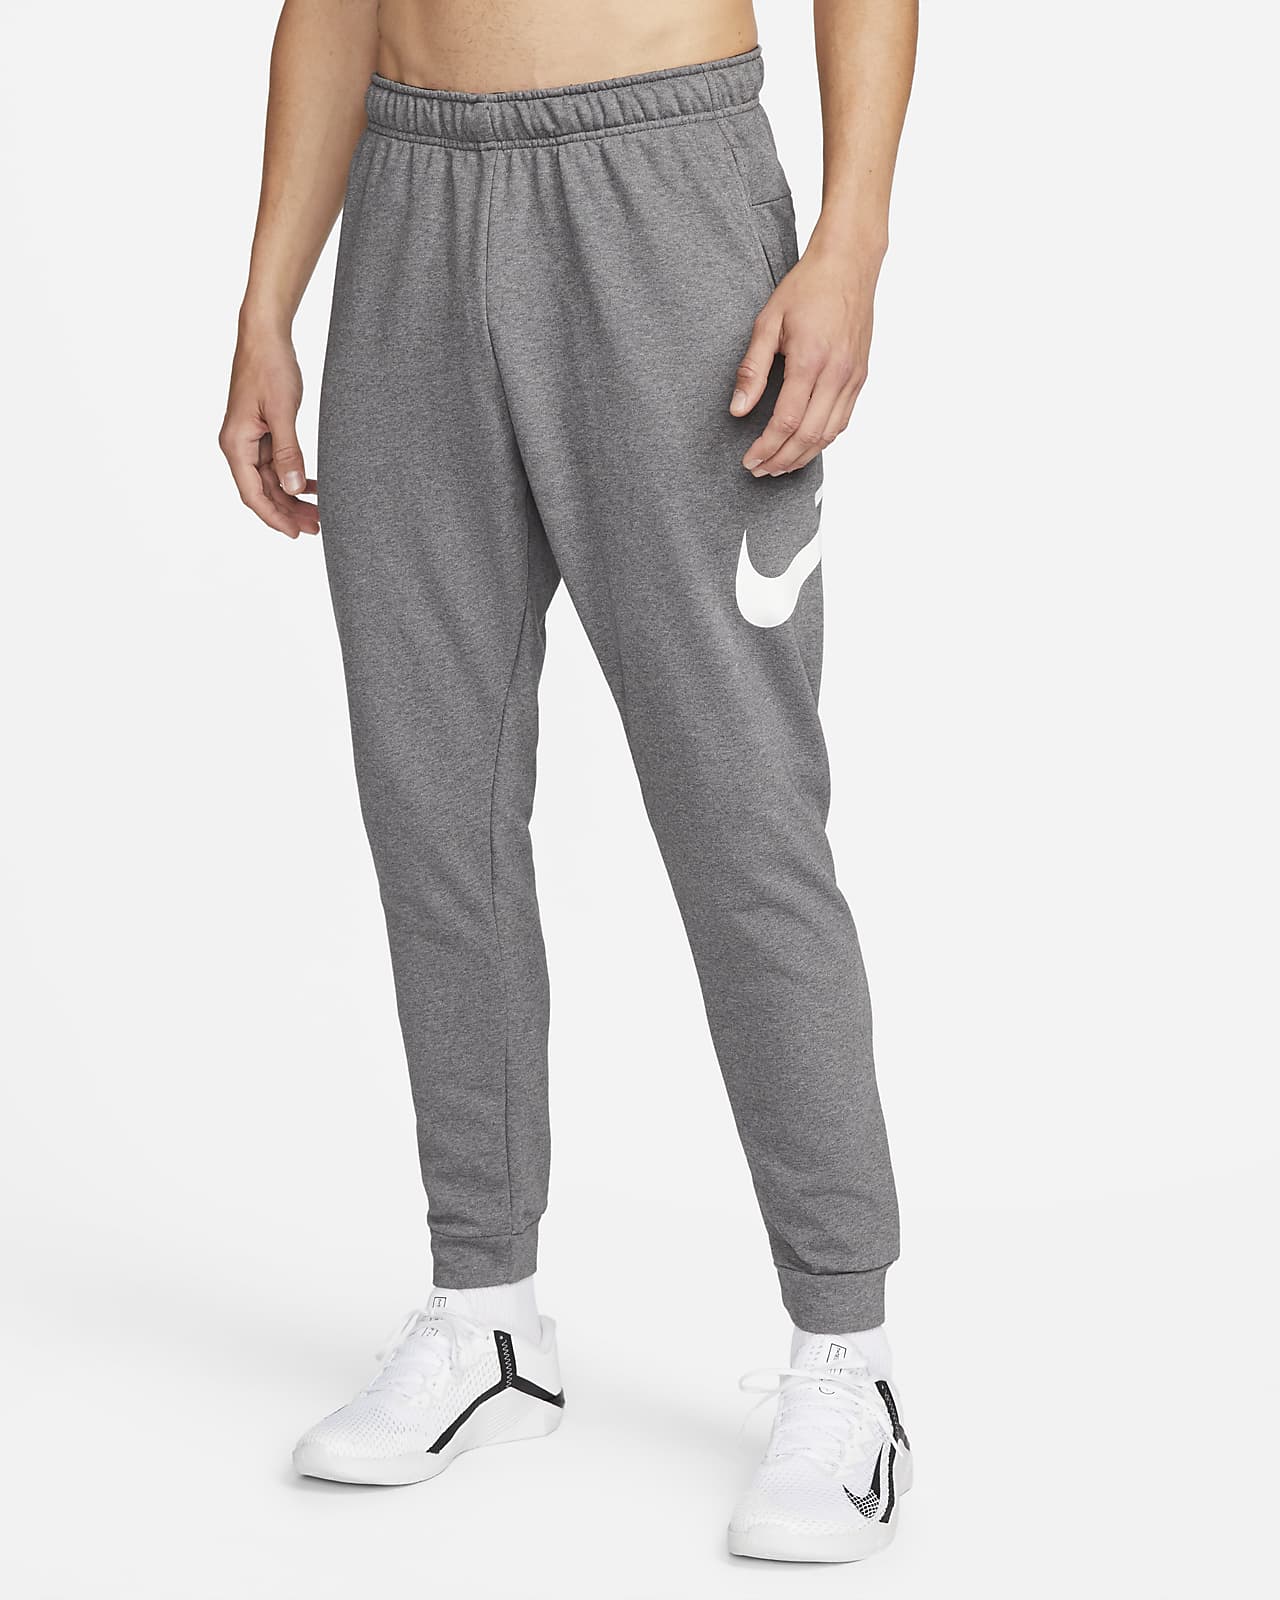 Nike | Therma-FIT Men's Tapered Training Pants | Performance Fleece Bottoms  | SportsDirect.com